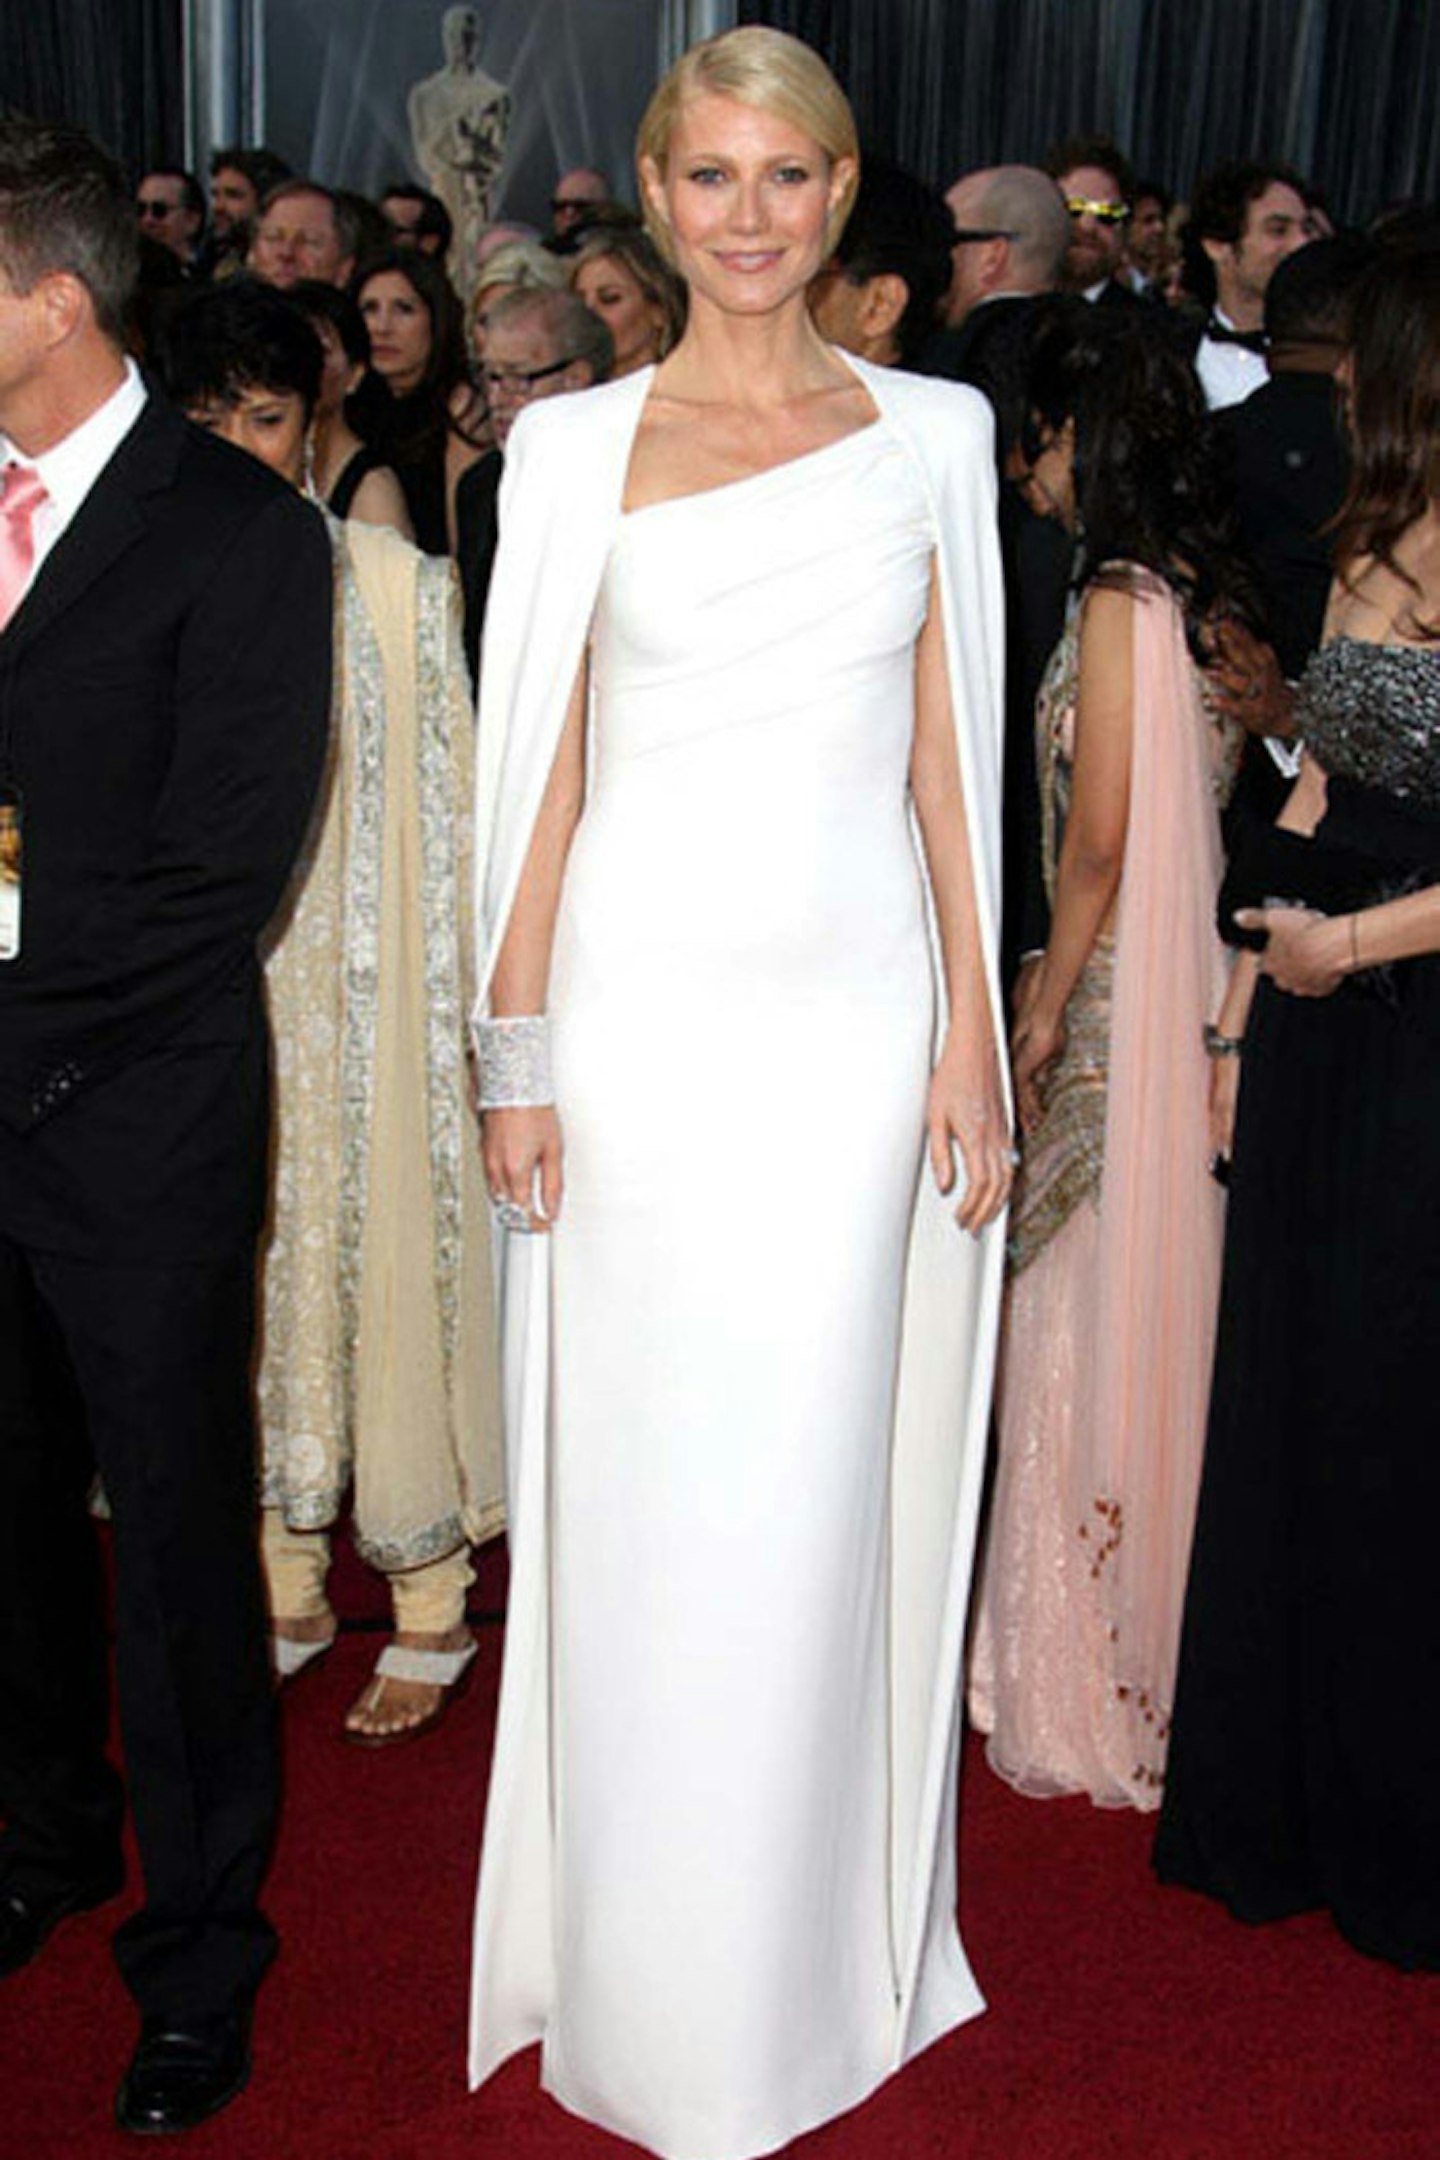 Gwyneth Paltrow in Tom Ford at The Academy Awards, February 2012